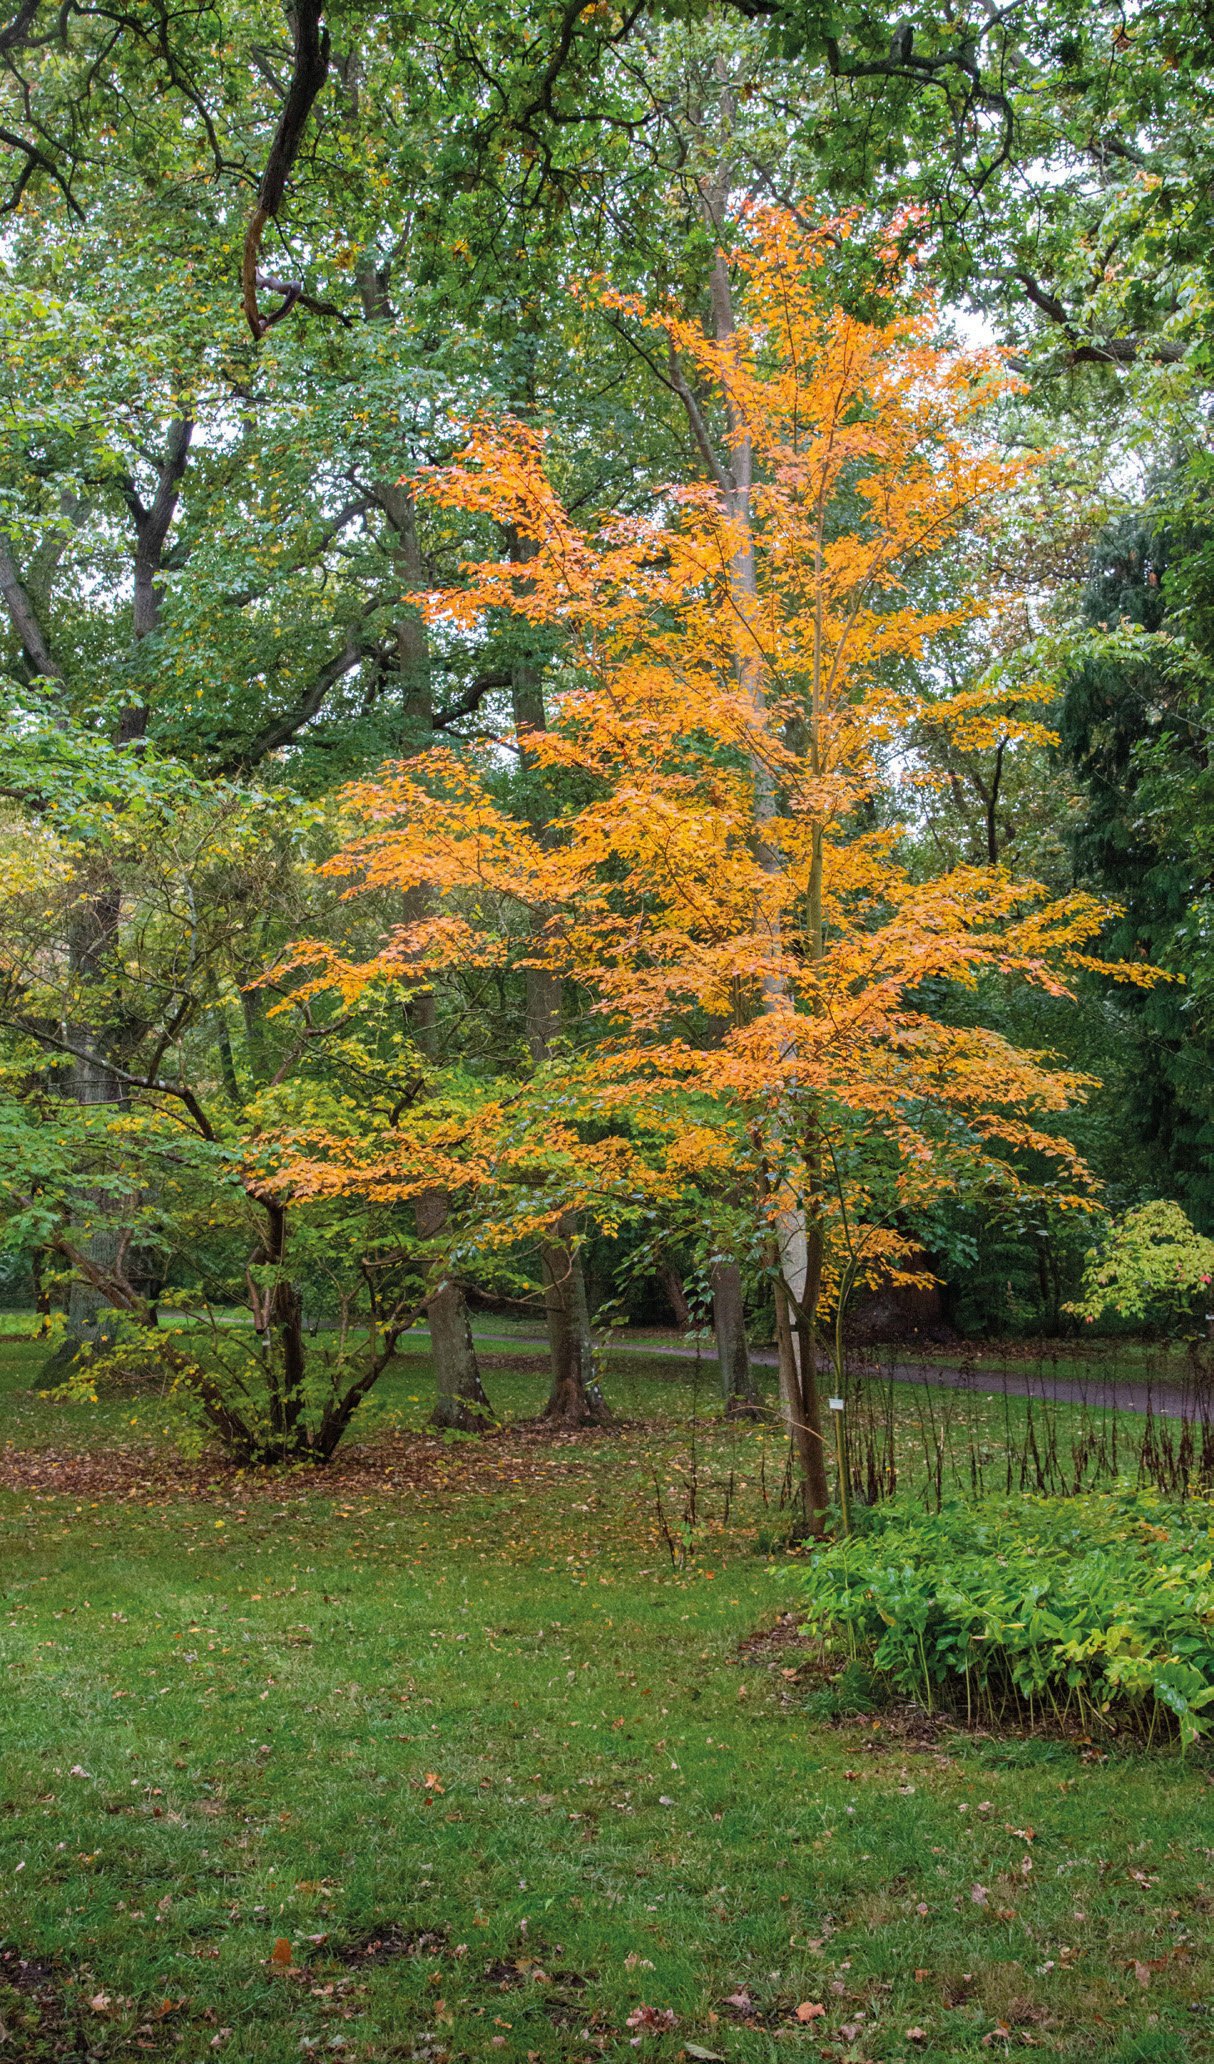 The Tschonoski maple develops into a smaller tree, usually with a multi-stemmed expression.